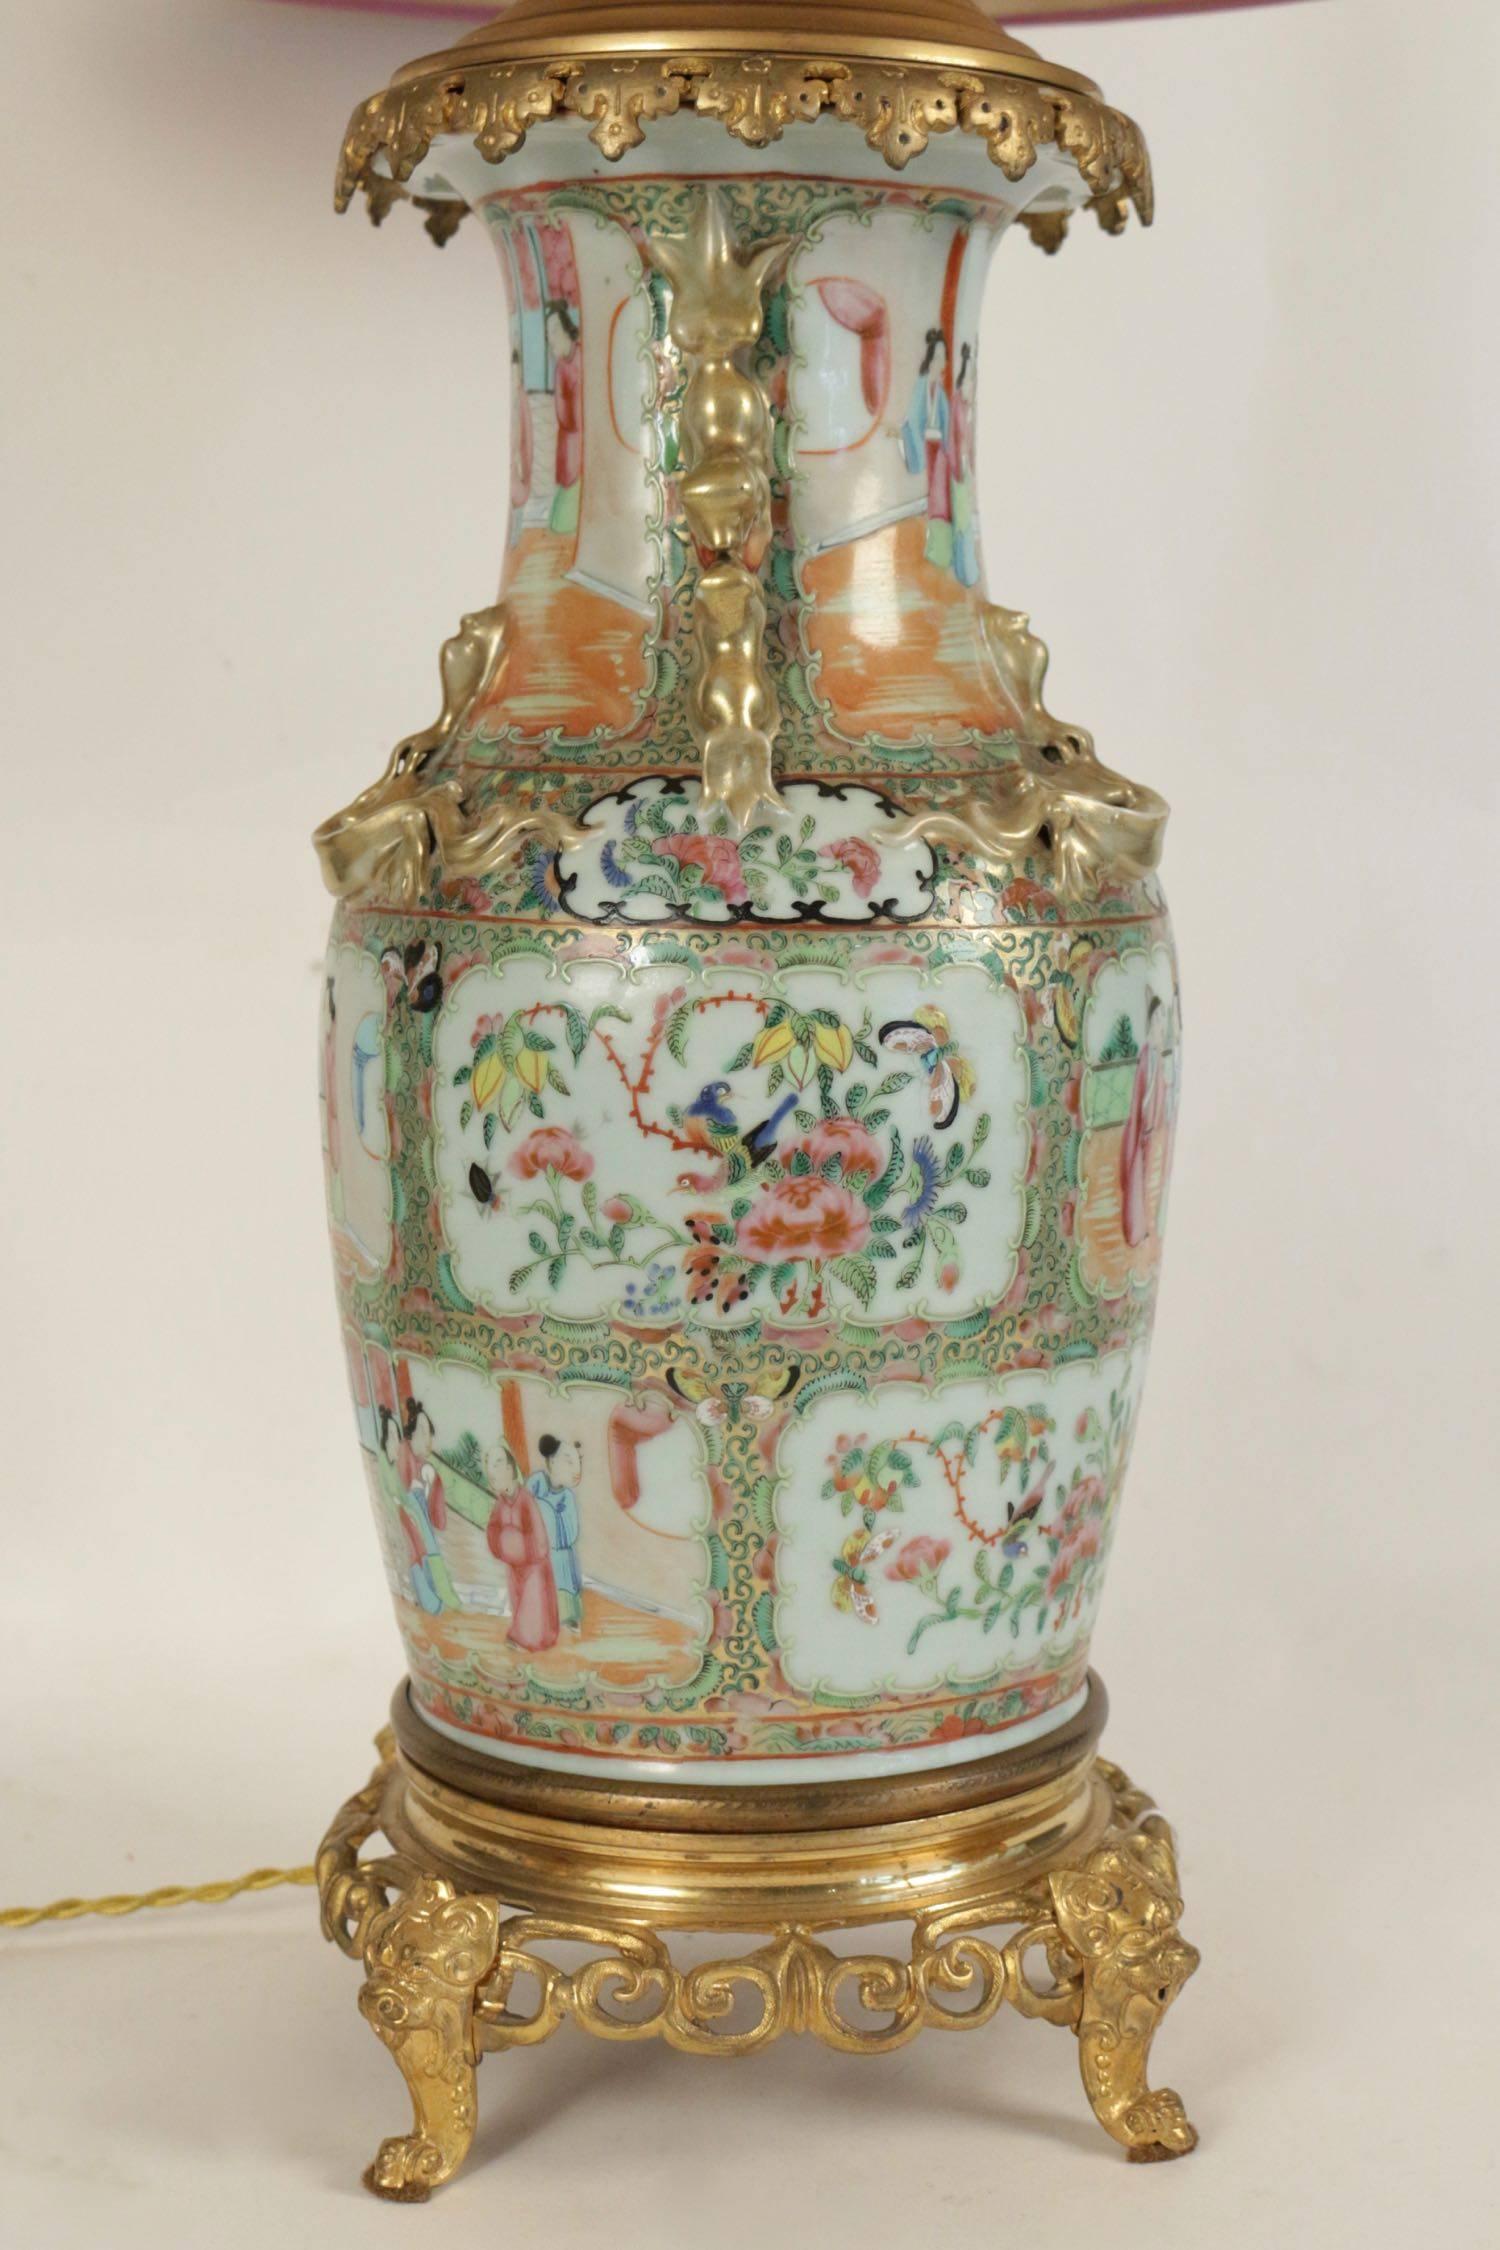 Chinese Export Chinese Porcelain Lampe from the 19th Century